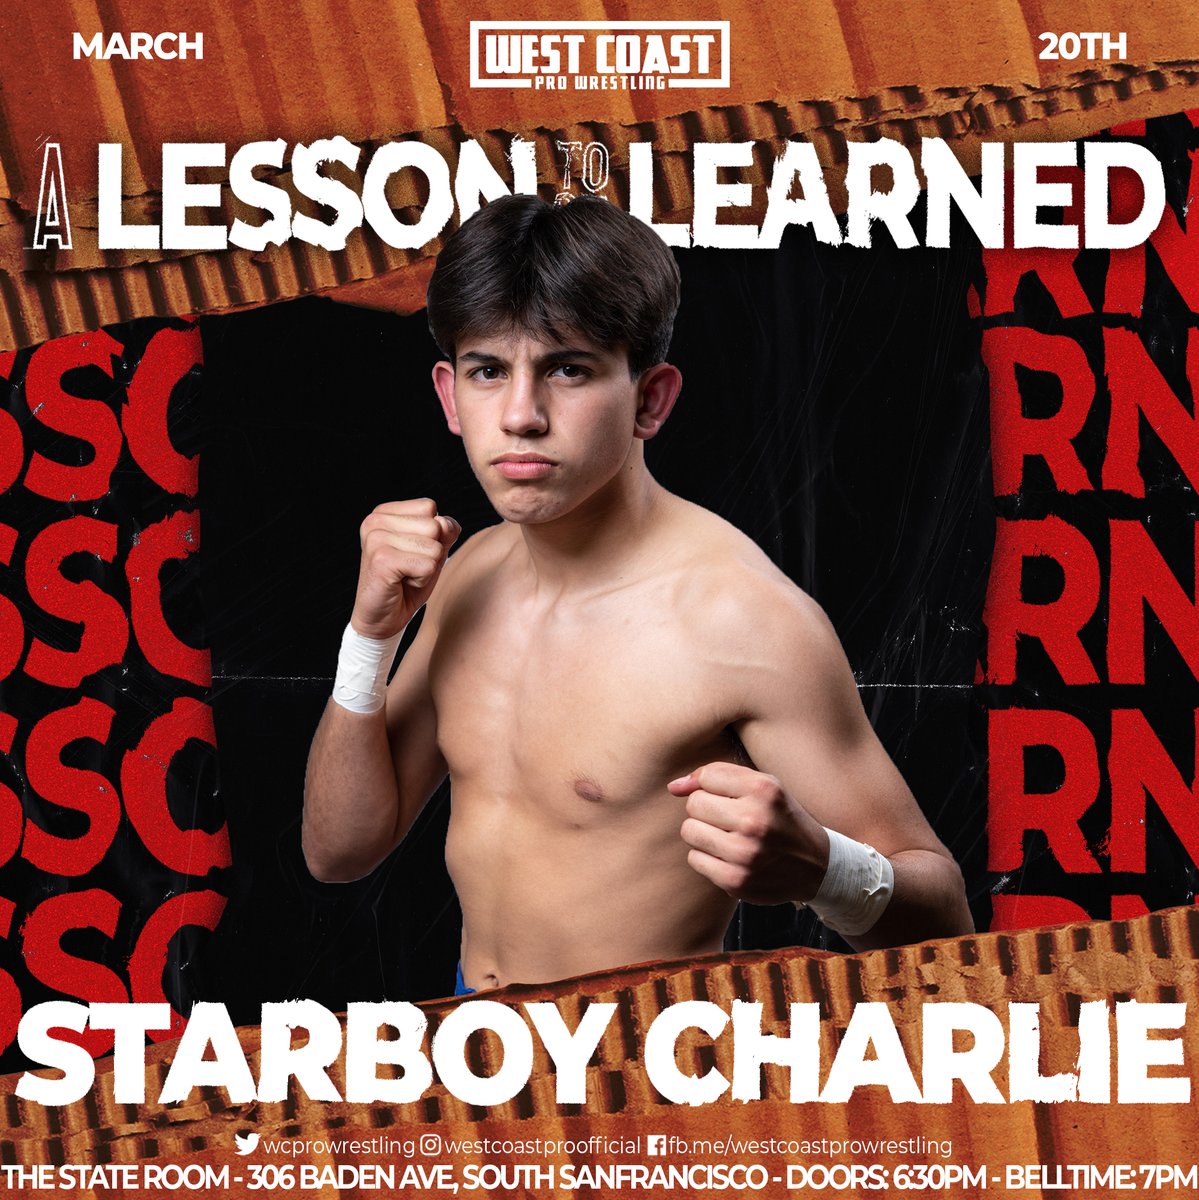  @starb0ycharlie Started wrestling at 12 or 13(I forget), still only 17. Made his name in  @WCProOfficial where he had a great series of matches with Jake Atlas. You probally know him from GCW.